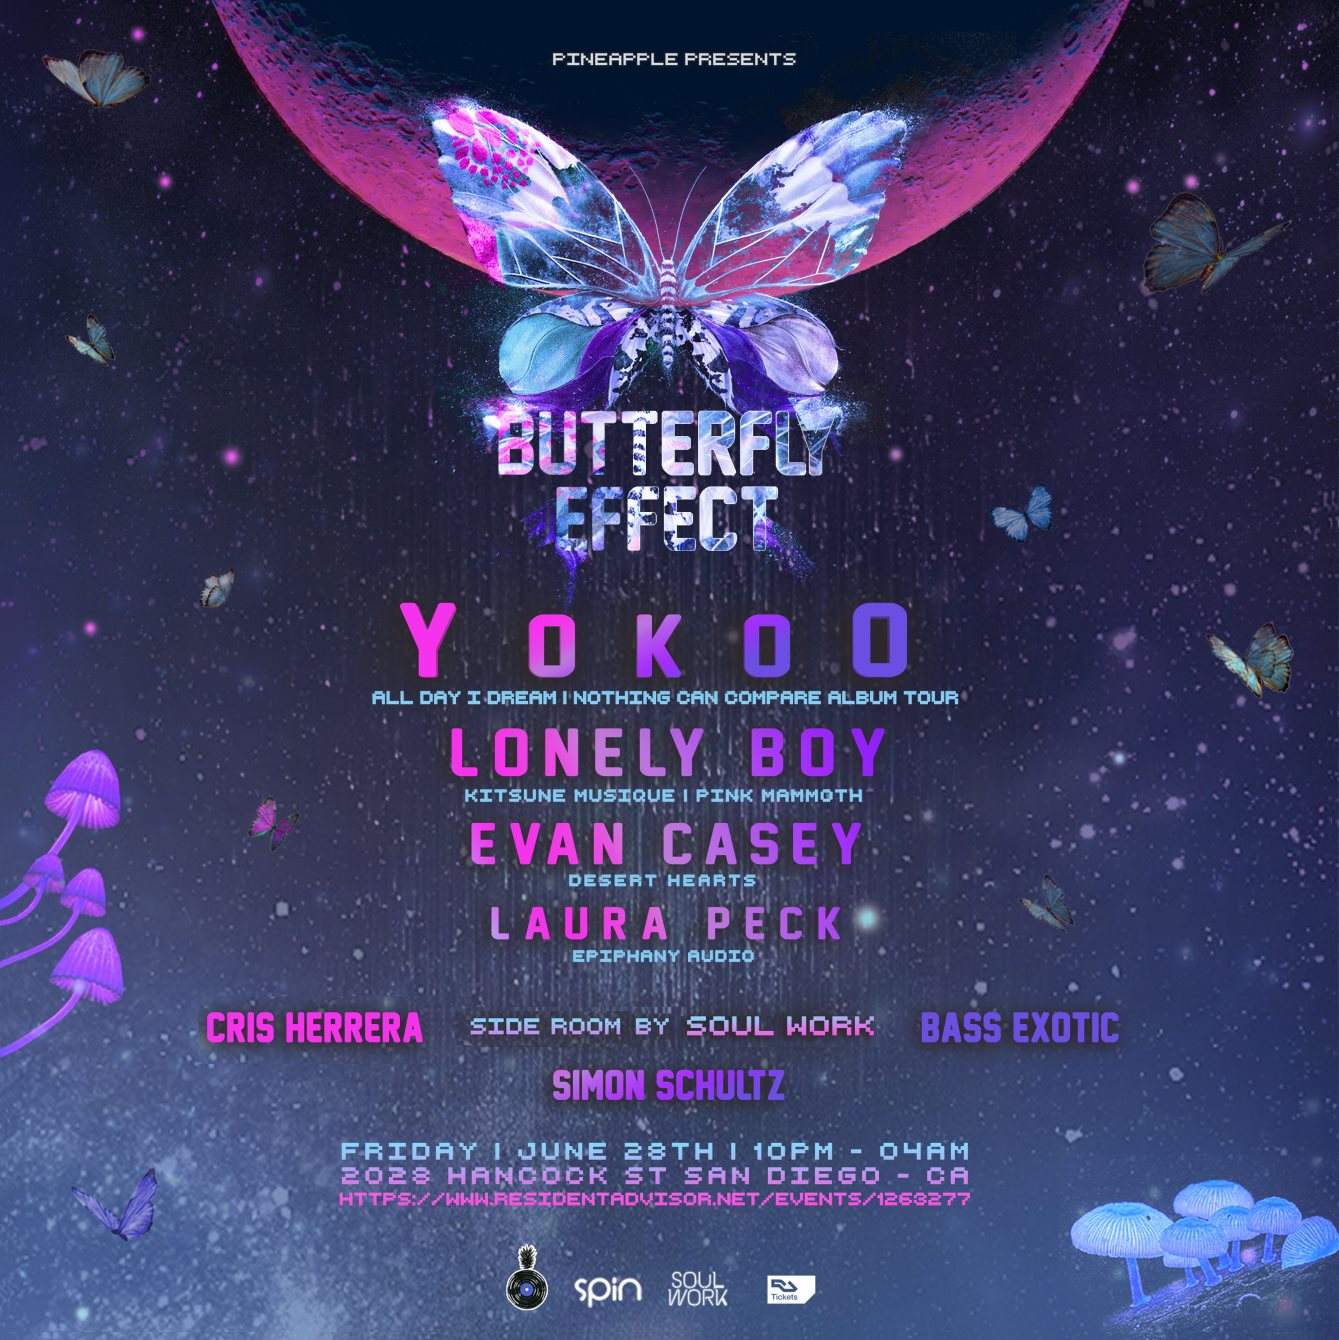 Pineapple presents: Butterfly Effect with YokoO, Lonely Boy, Evan Casey, Laura Peck - フライヤー表